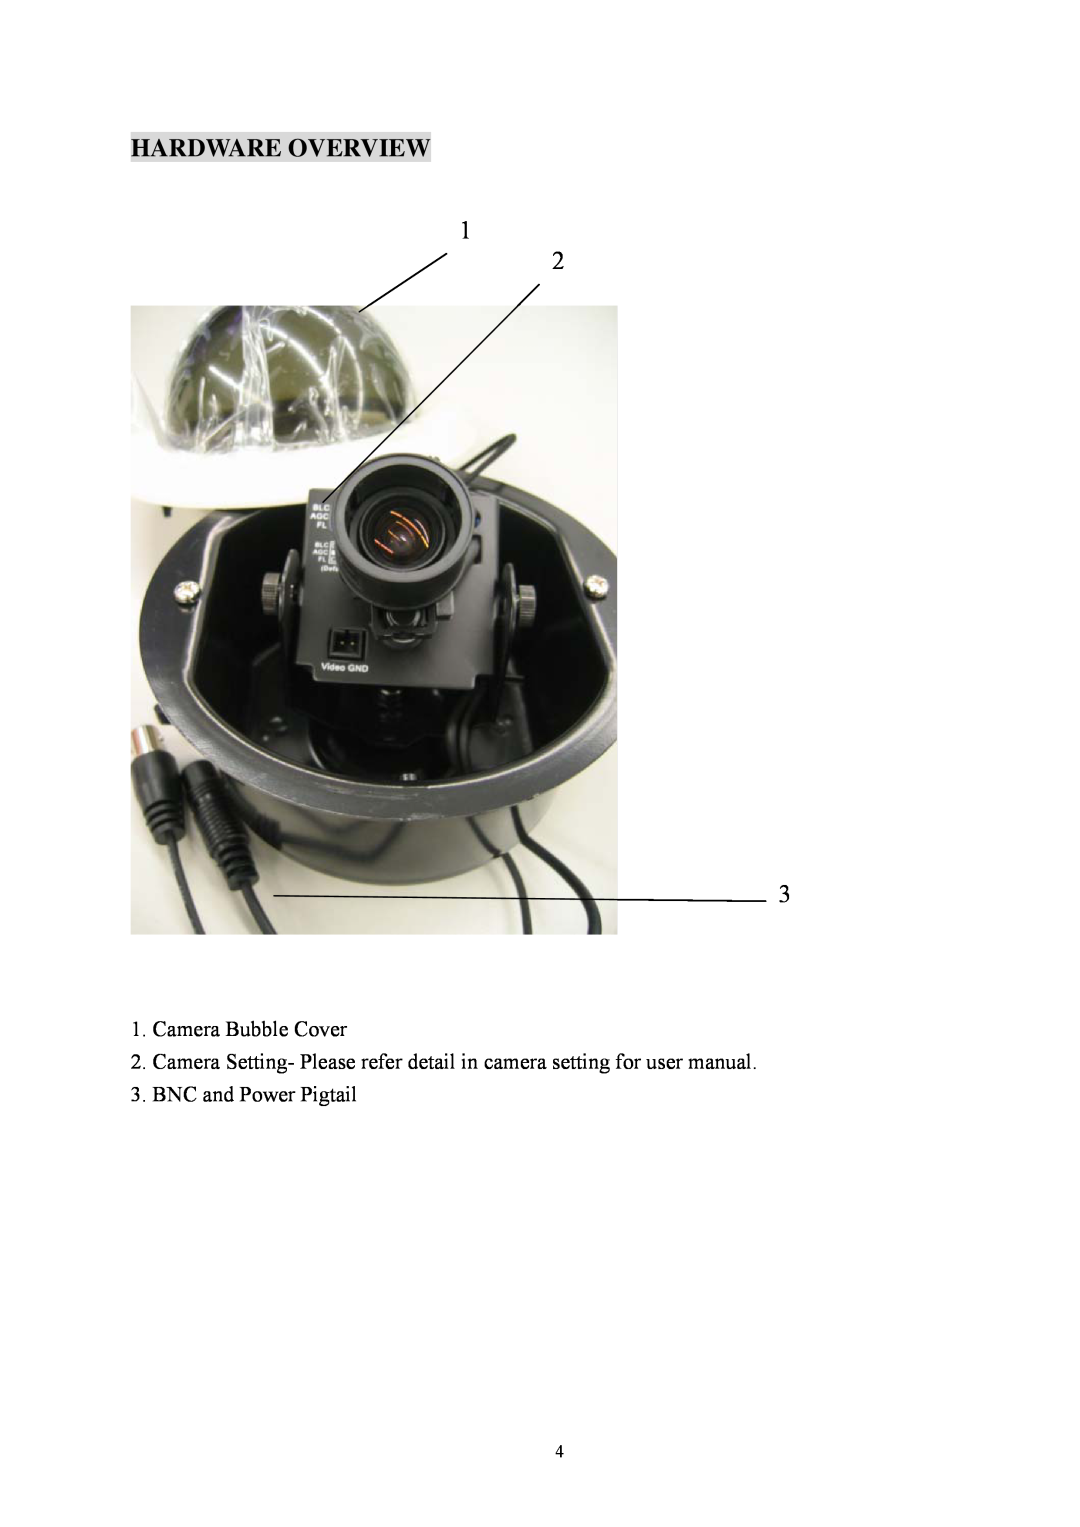 EverFocus EFD300 specifications Hardware Overview, Camera Bubble Cover, BNC and Power Pigtail 